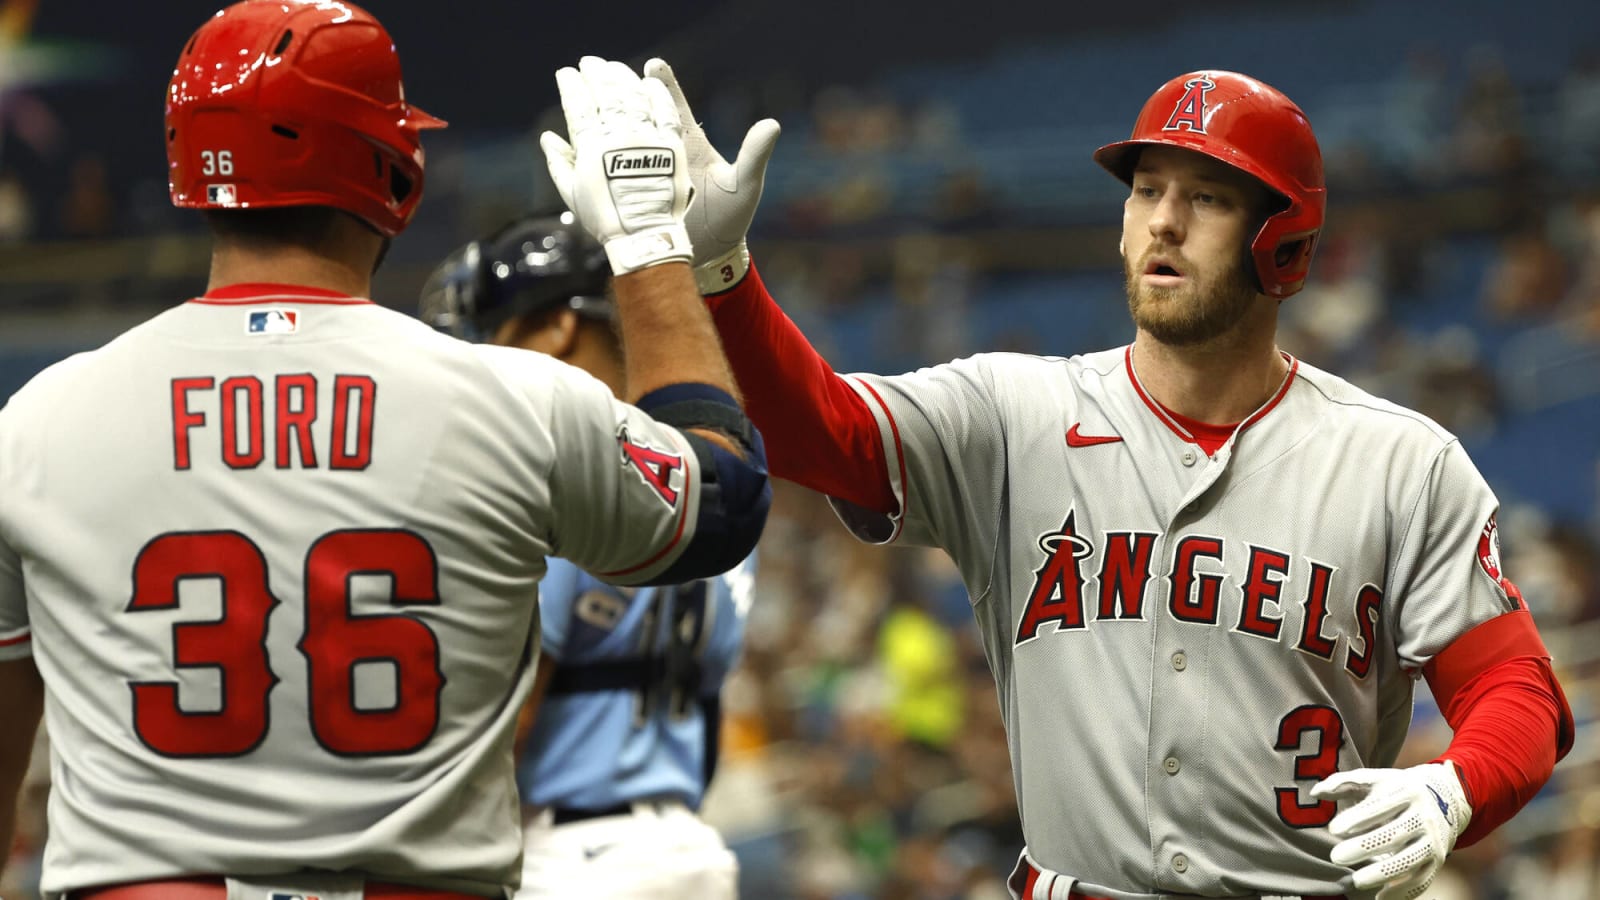 Jeremy Reed: Angels Coaches ‘Working’ With Players To Improve Swing Mechanics